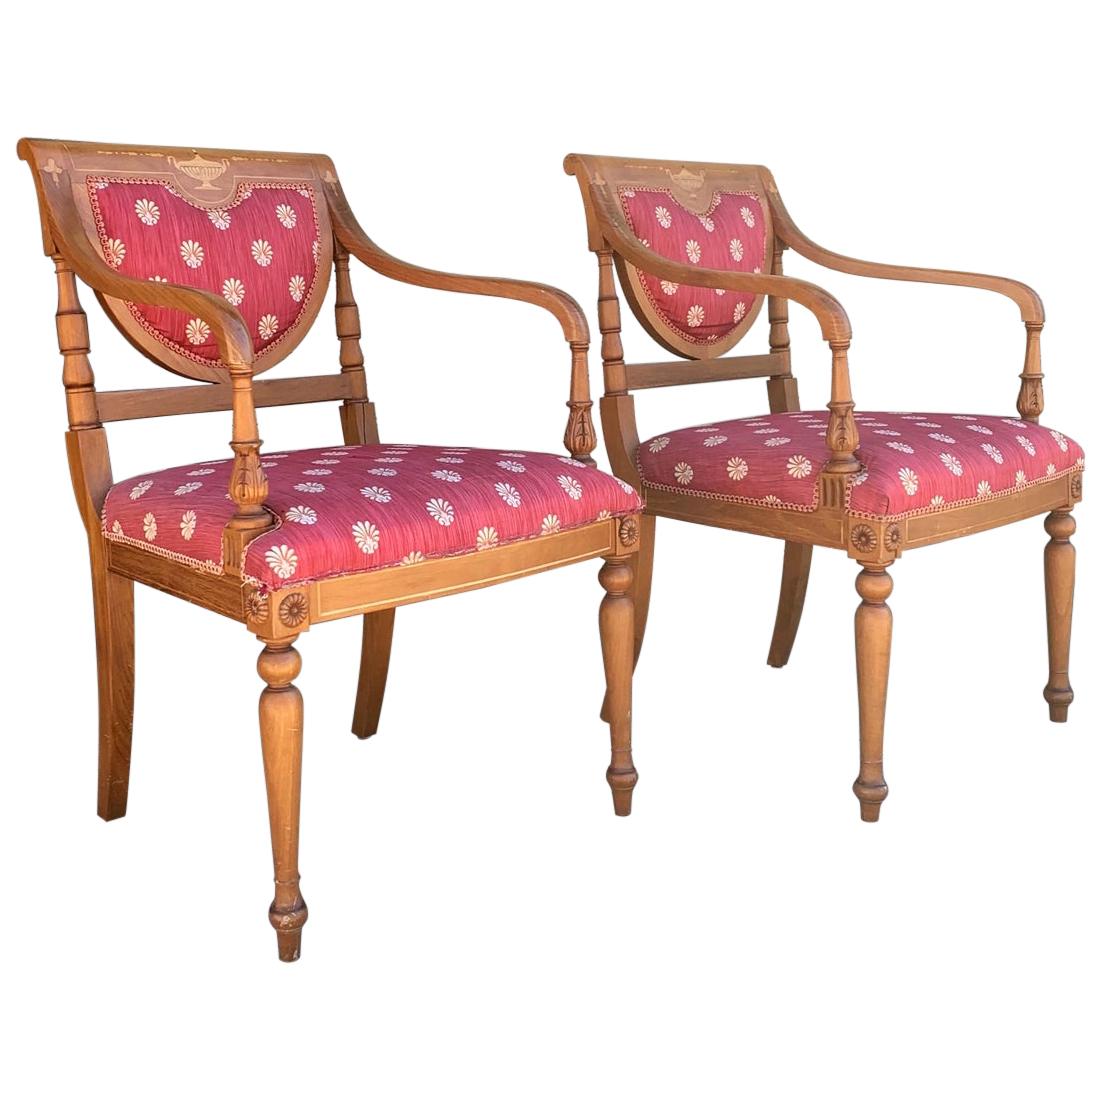 2 Antique Armchairs with Parquetry Inlay by Rossita For Sale